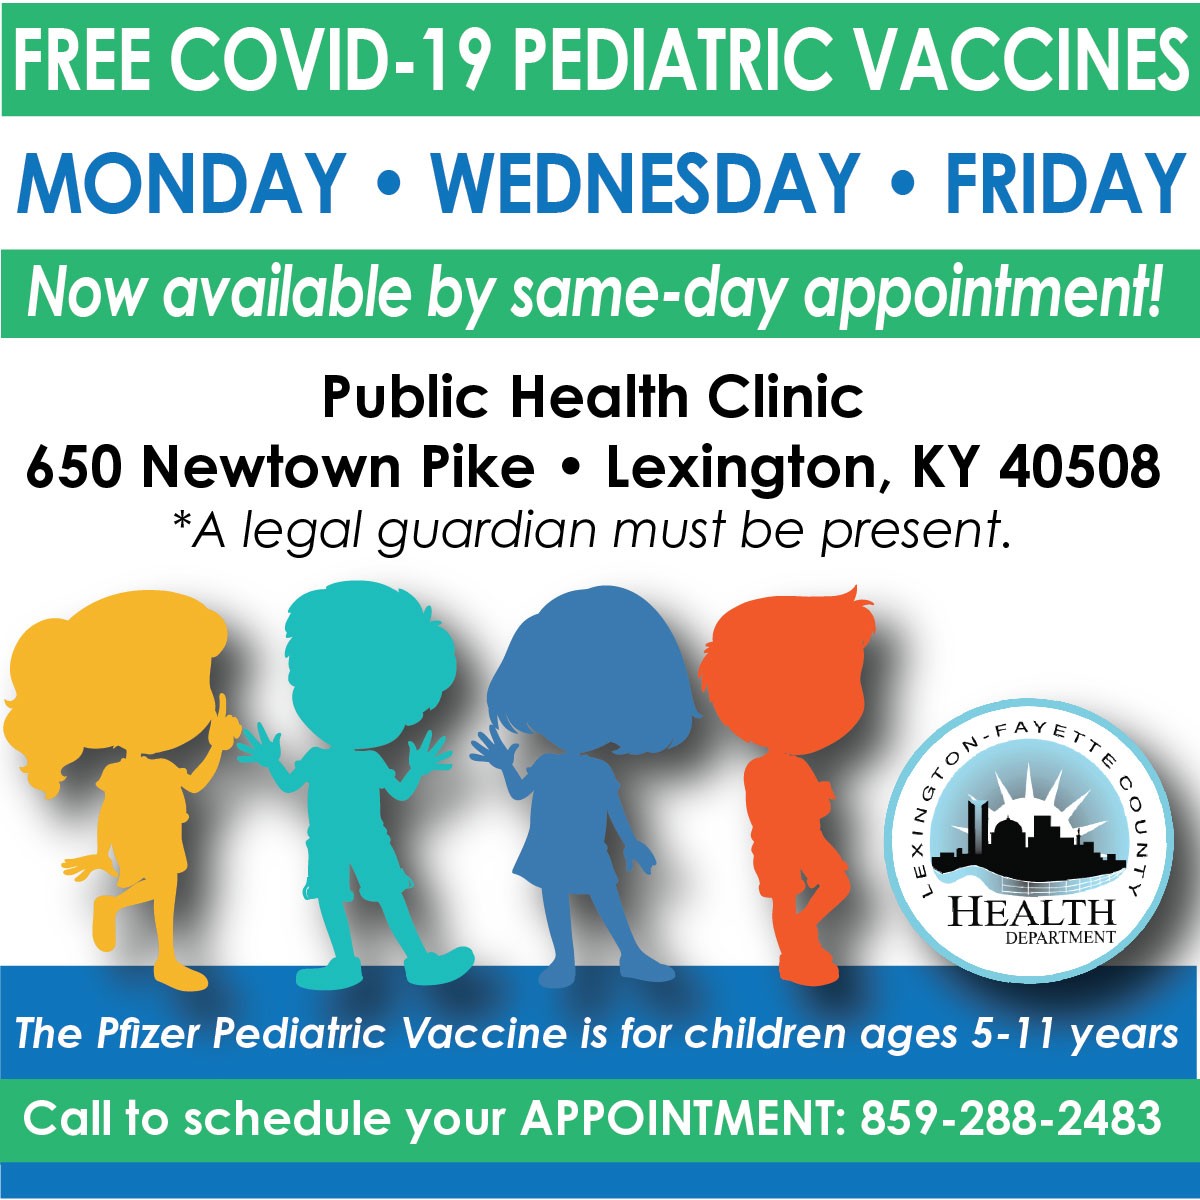 Pfizer COVID-19 vaccine for ages 5-11 years